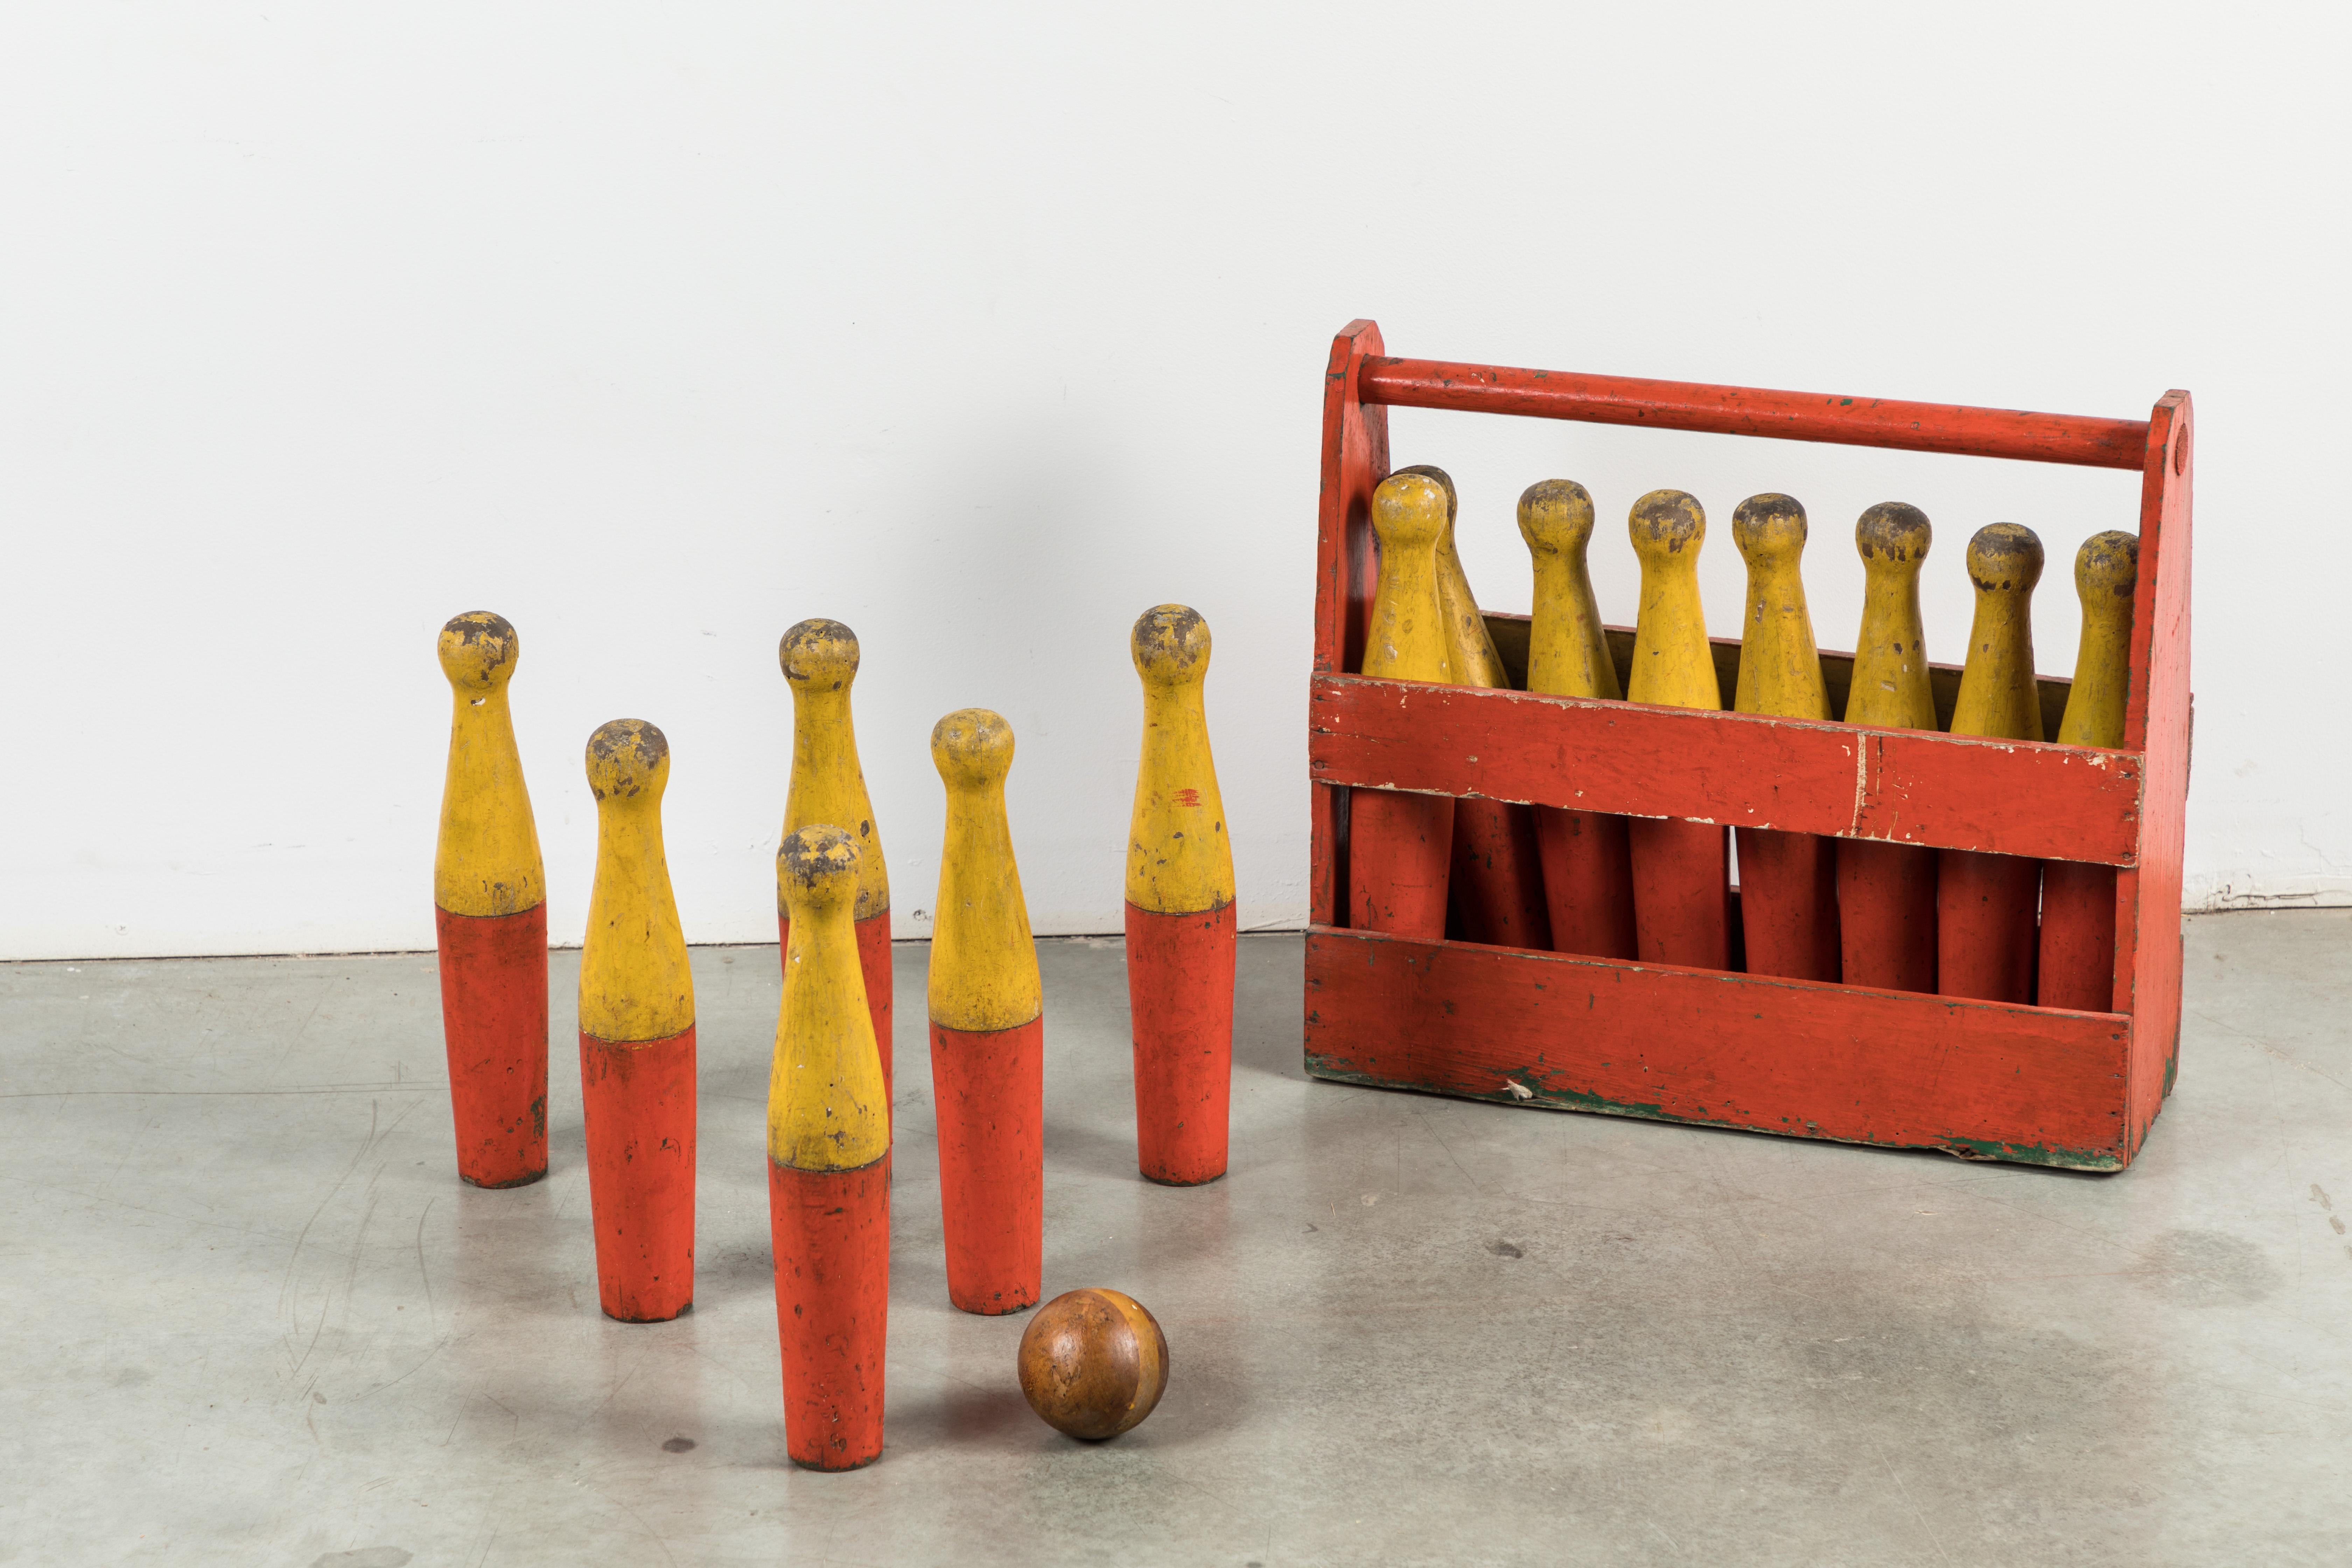 Hand-Painted Wood Lawn Bowling Game Original Caddy and Bowling Balls, circa 1900 For Sale